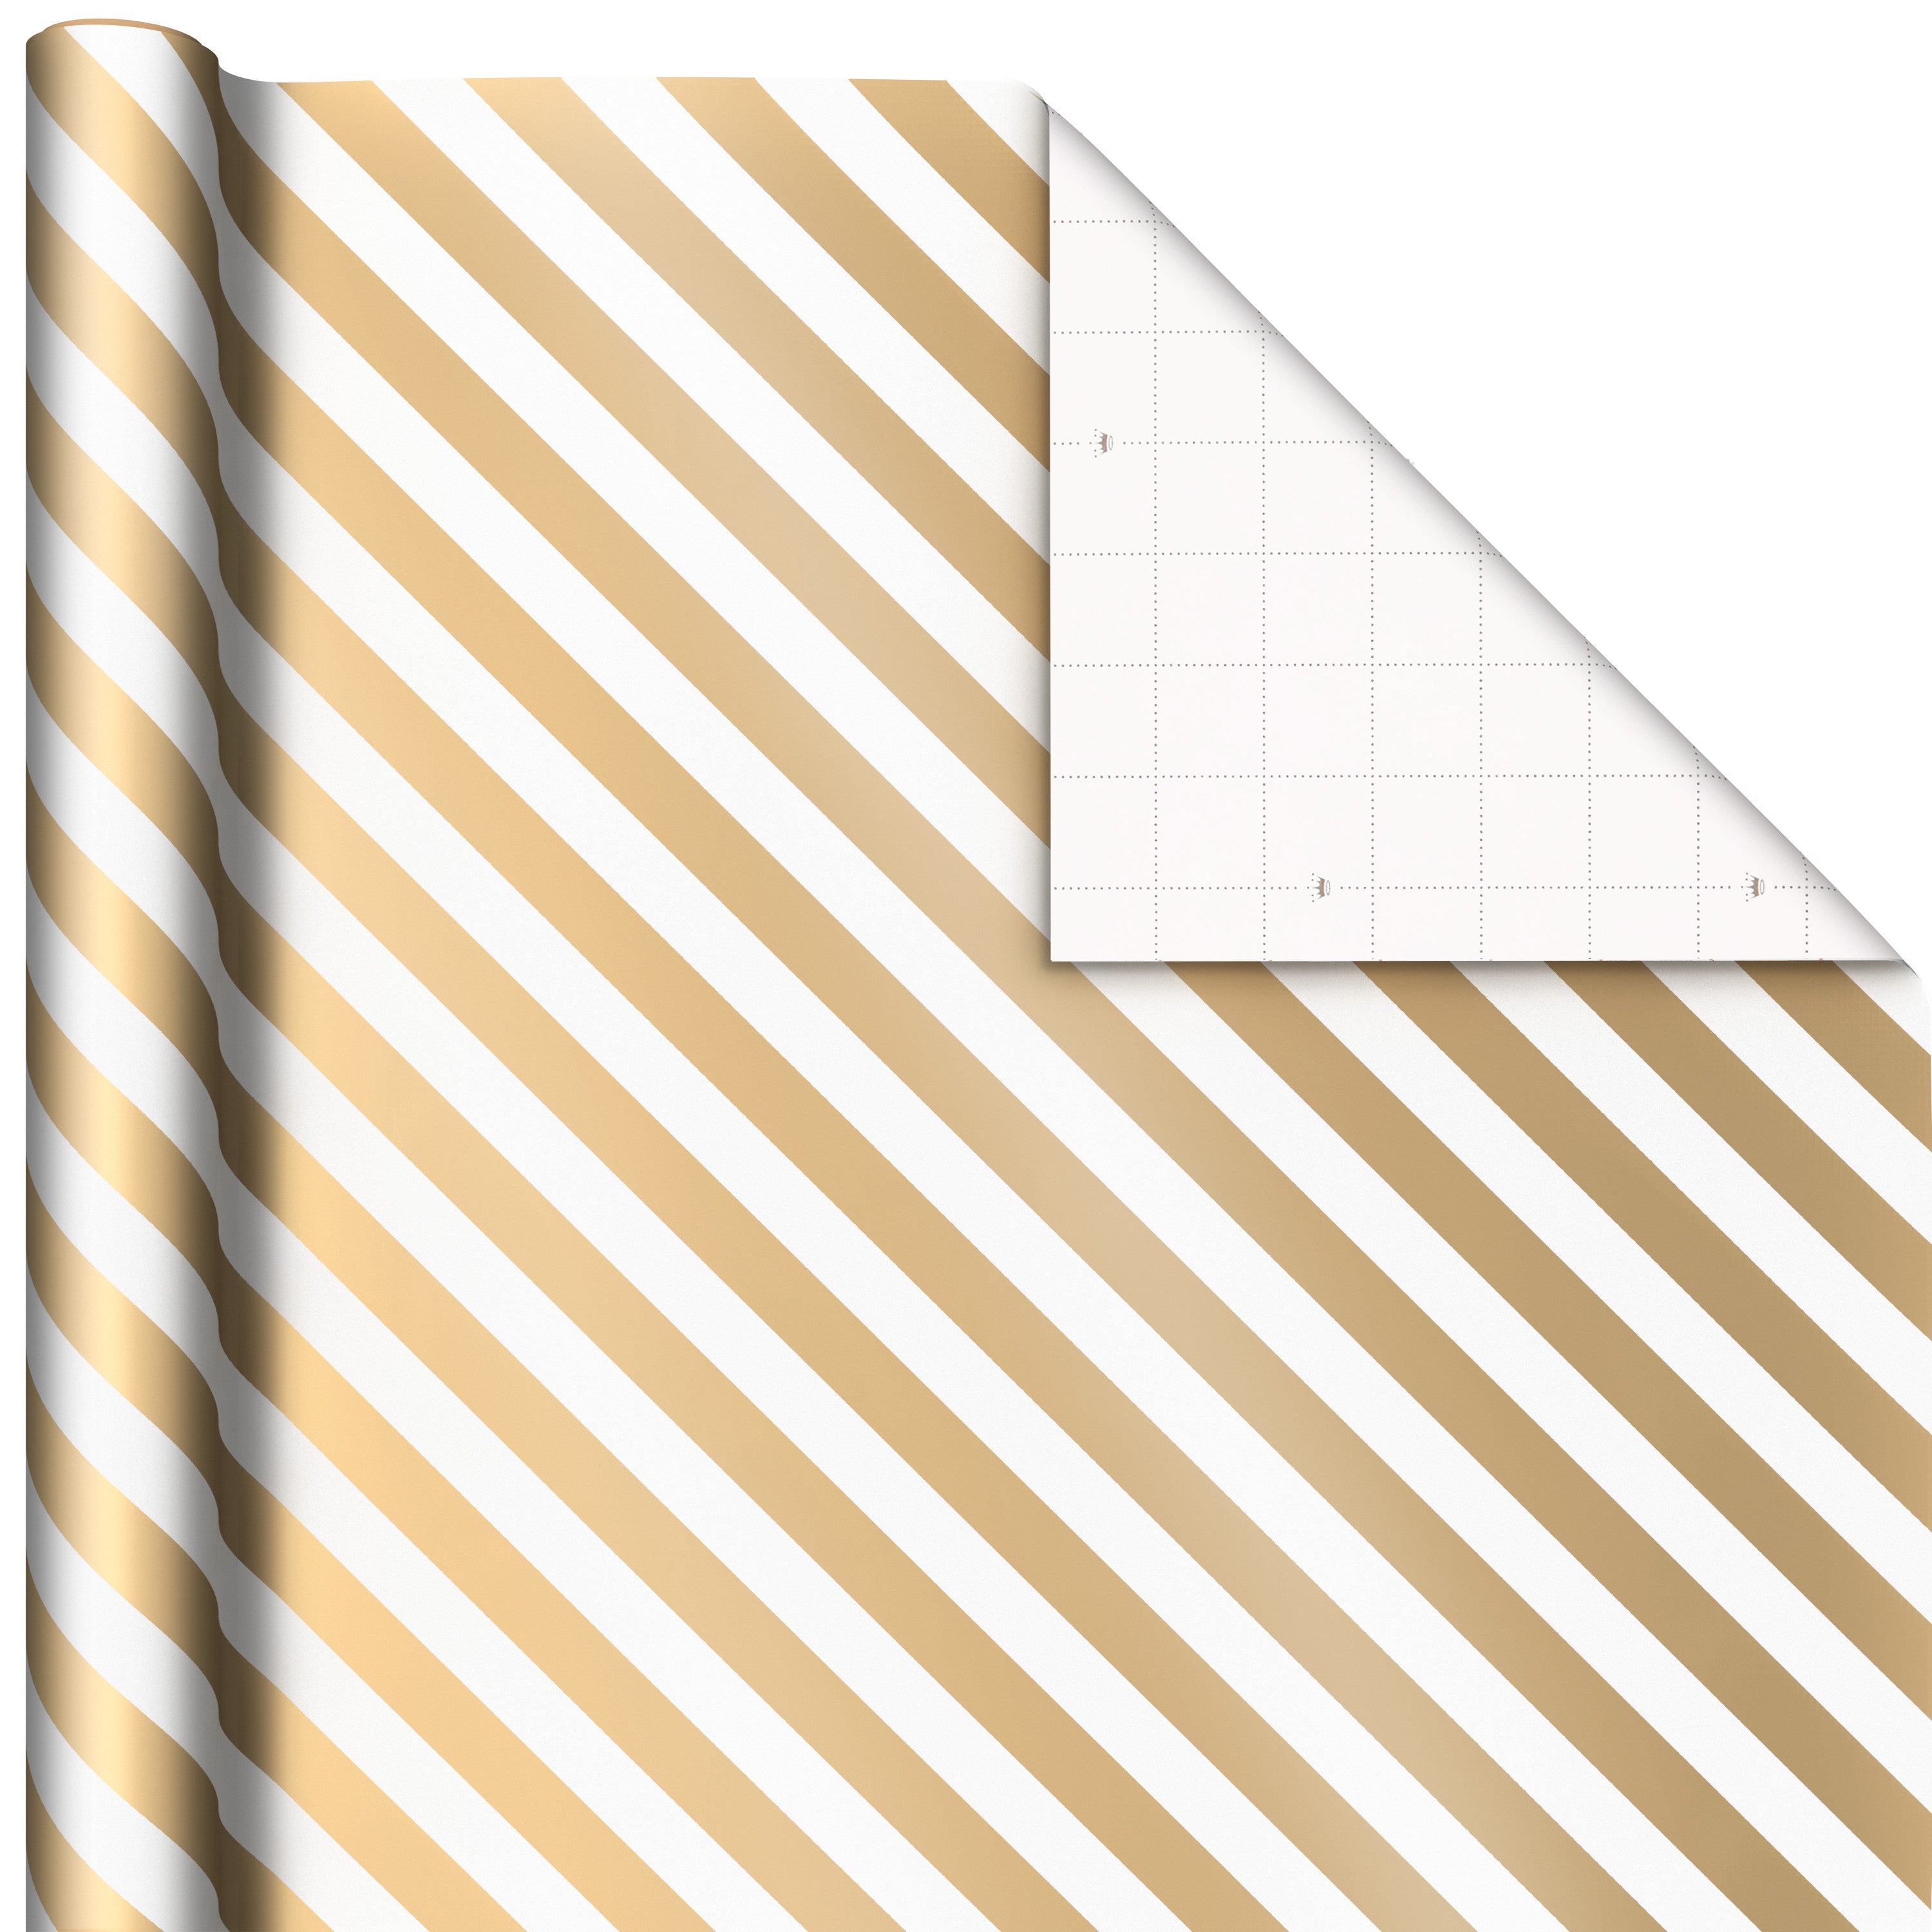 Hallmark All Occasion Wrapping Paper Bundle with Cut Lines on Reverse - White and Gold (3-Pack: 105 sq. ft. ttl.) for Birthdays, Weddings, Valentine's Day, Graduations, Engagements, Bridal Showers and More